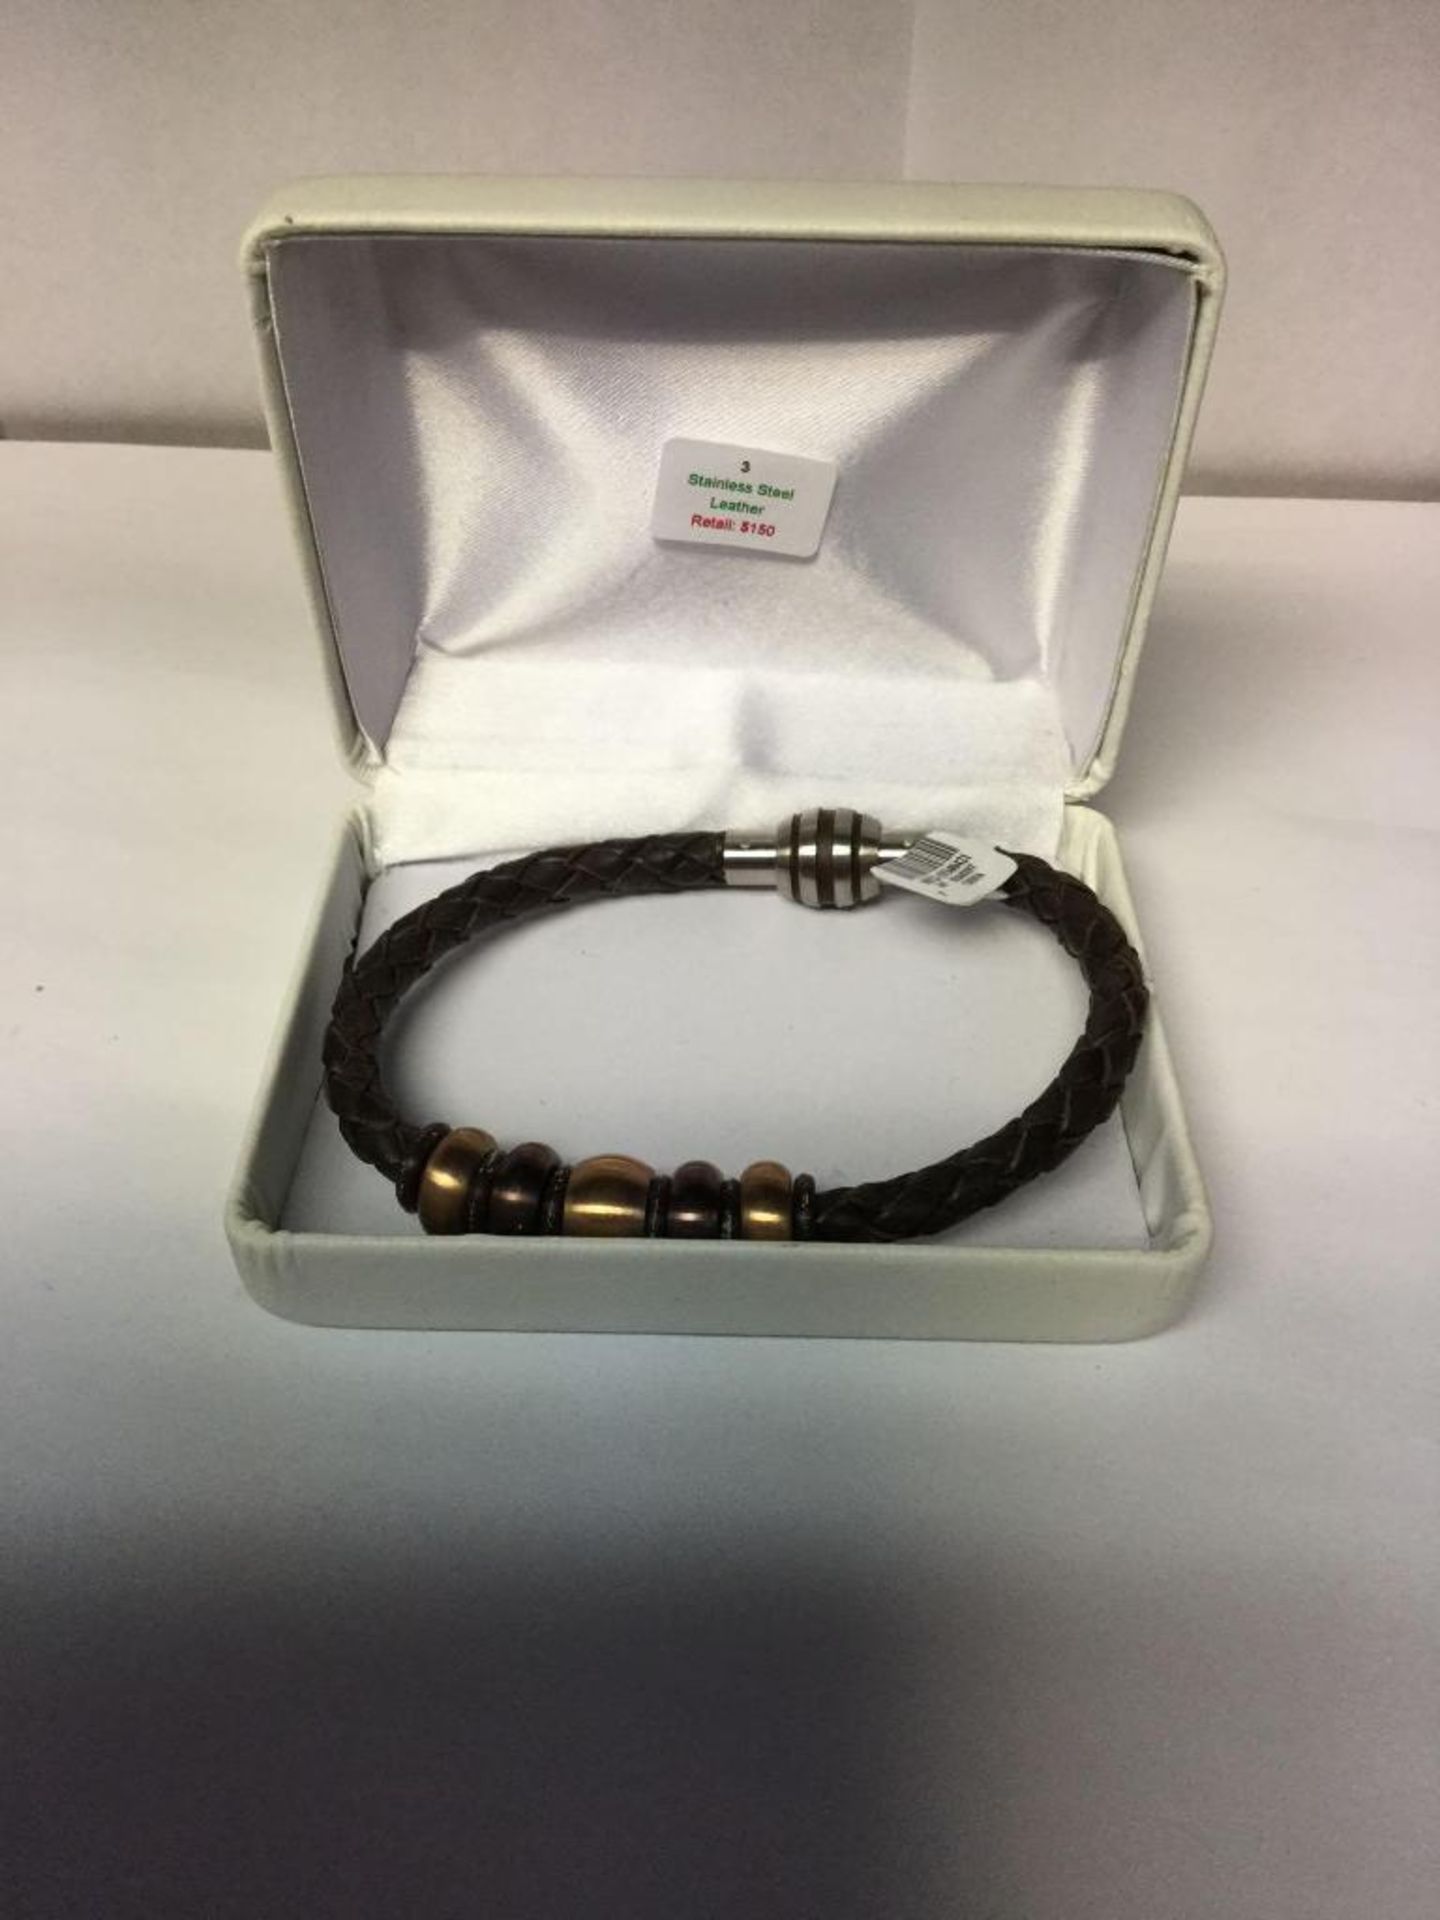 Stainless Steel Leather Bracelet Retail $150 - Image 2 of 2